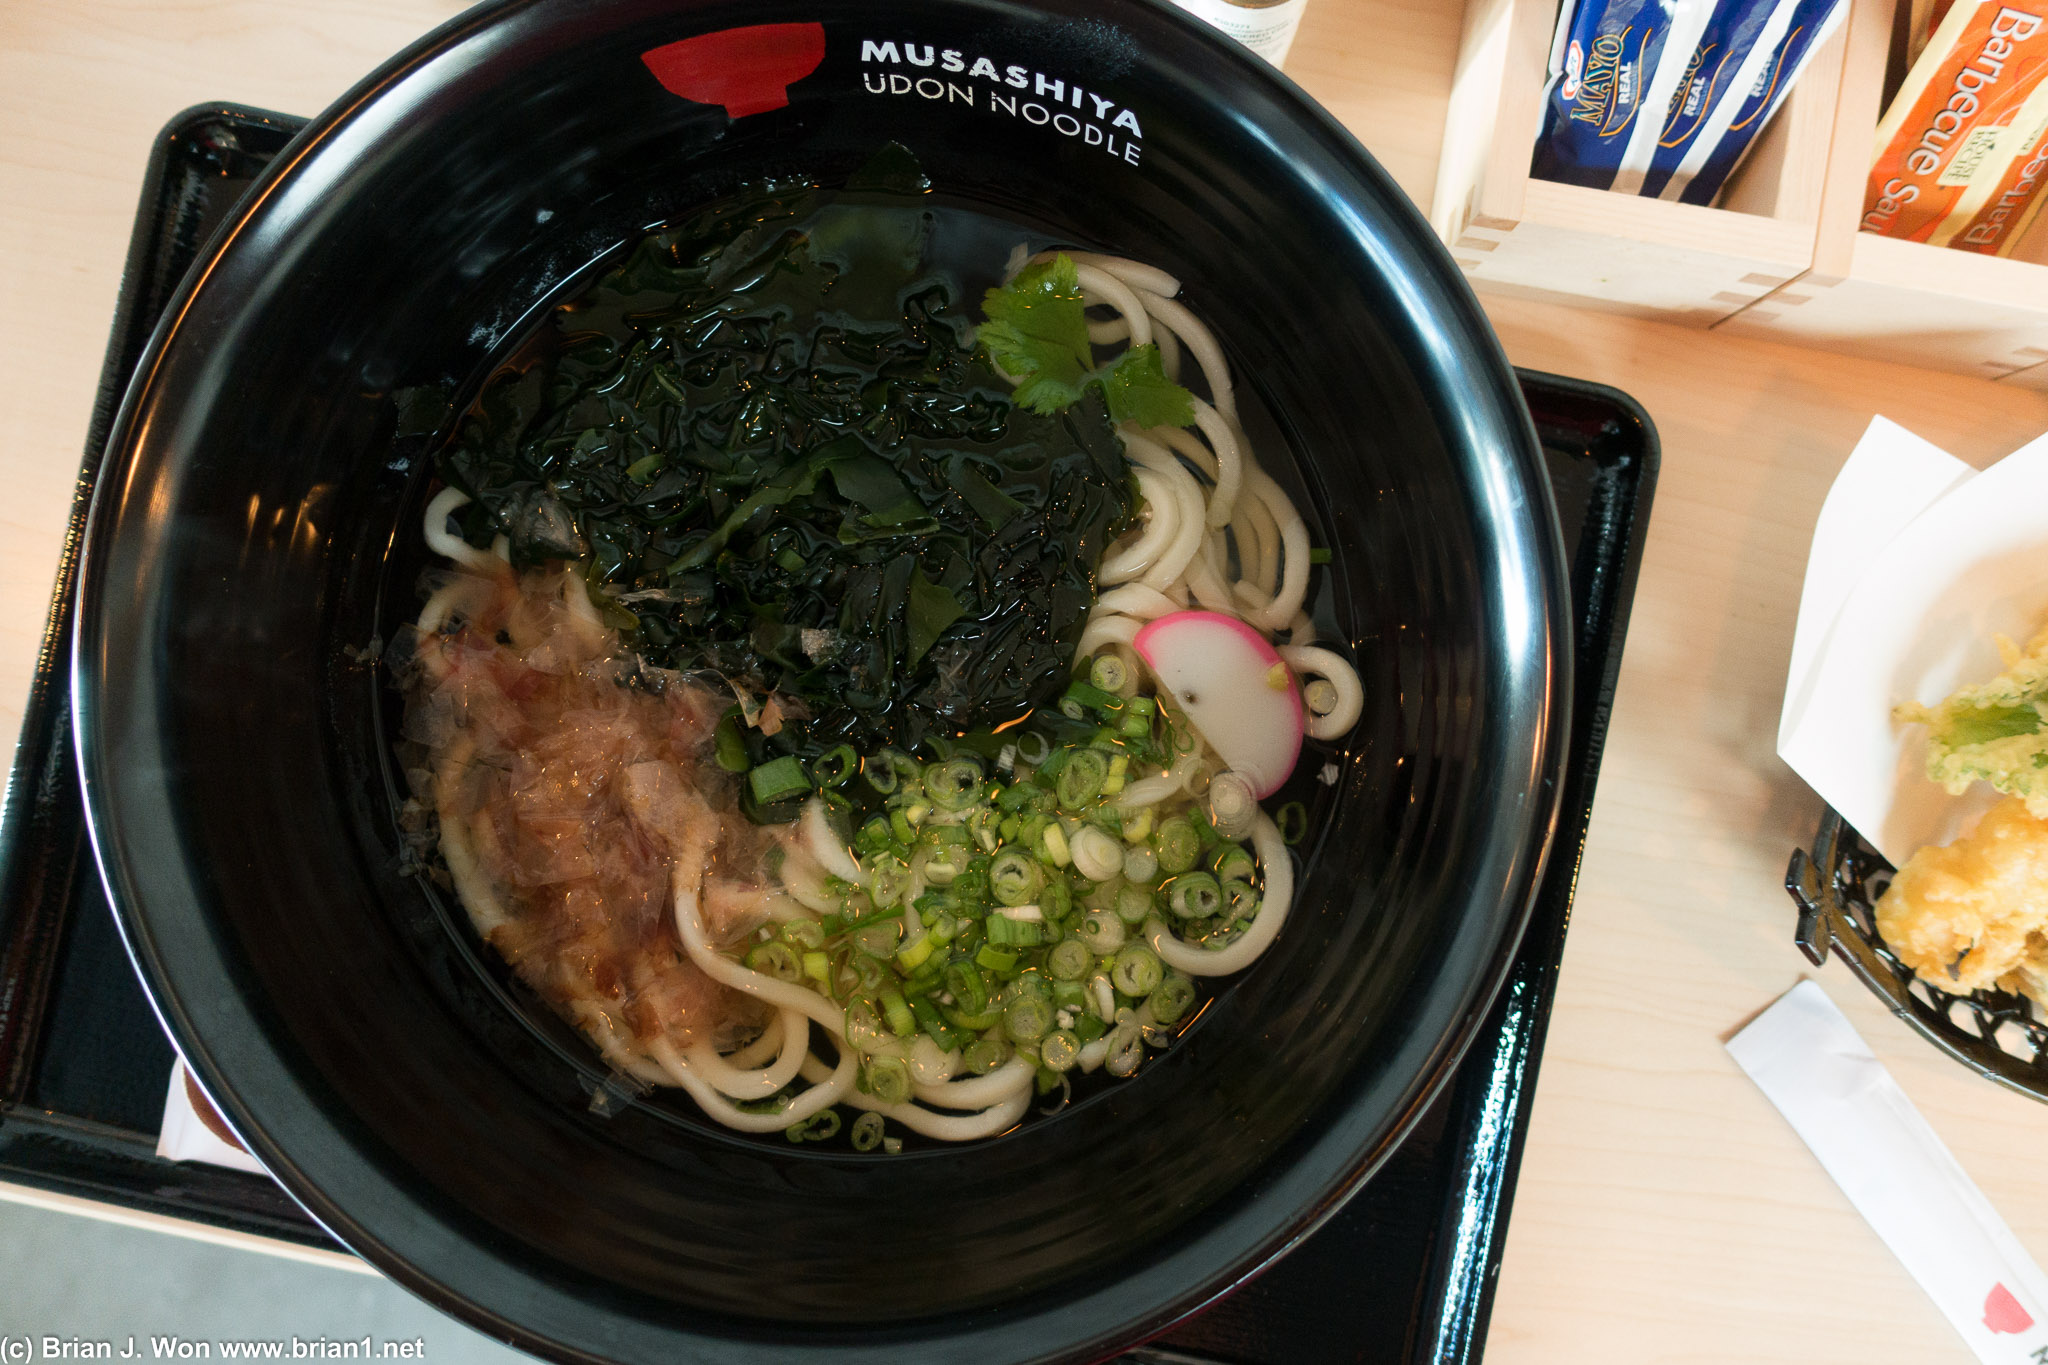 Sadly the udon is still pretty meh. The cold udon is definitely the way to go over the hot udon, tho.